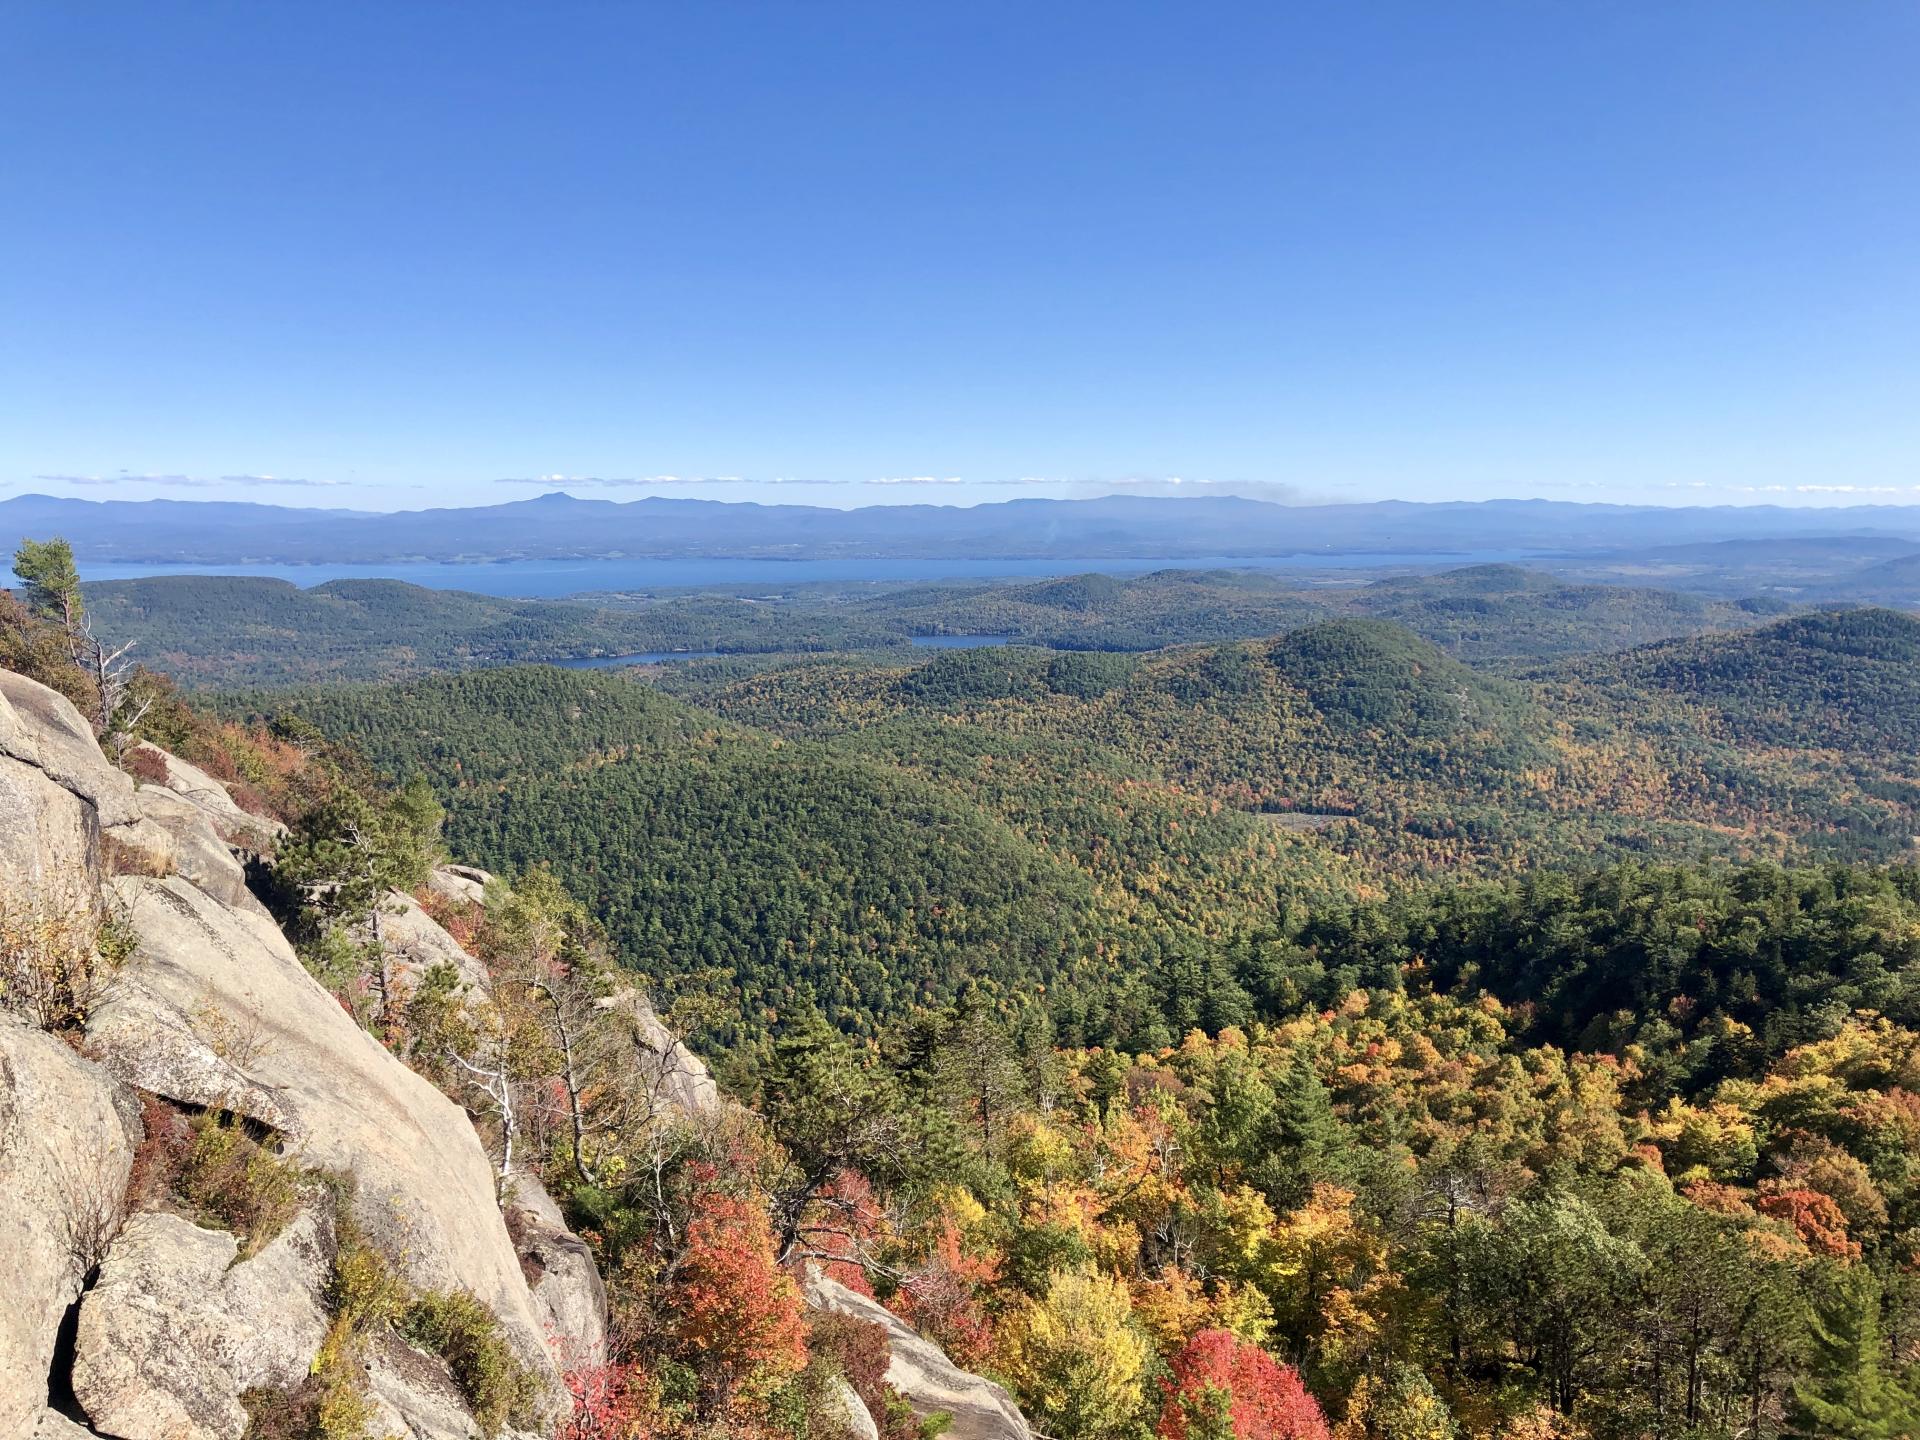 A rocky cliff looks over a colorful fall view